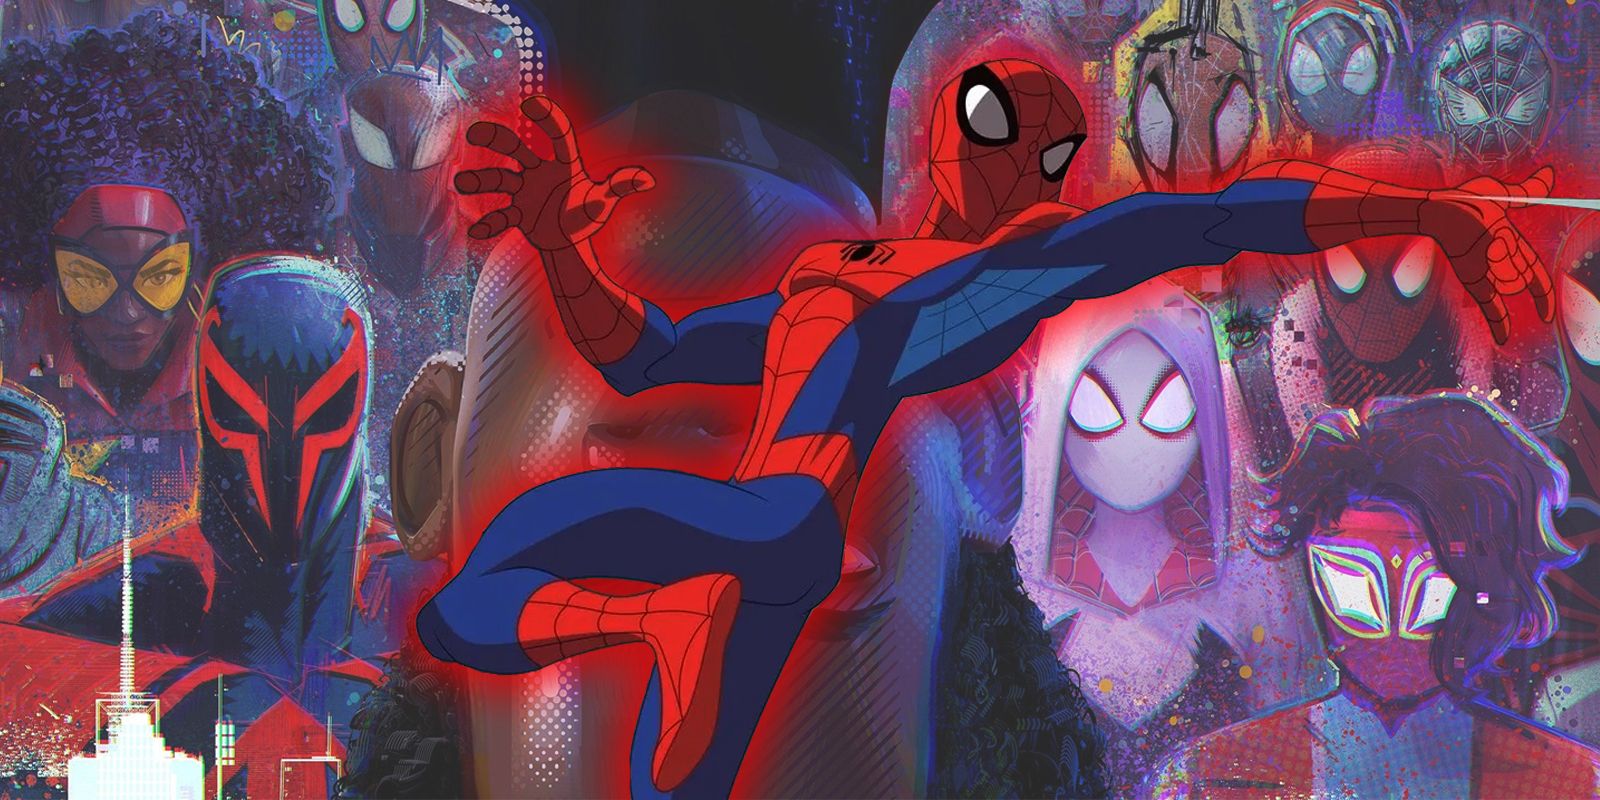 Spectacular Spider-Man swings with other multiversal Spider-People in the background